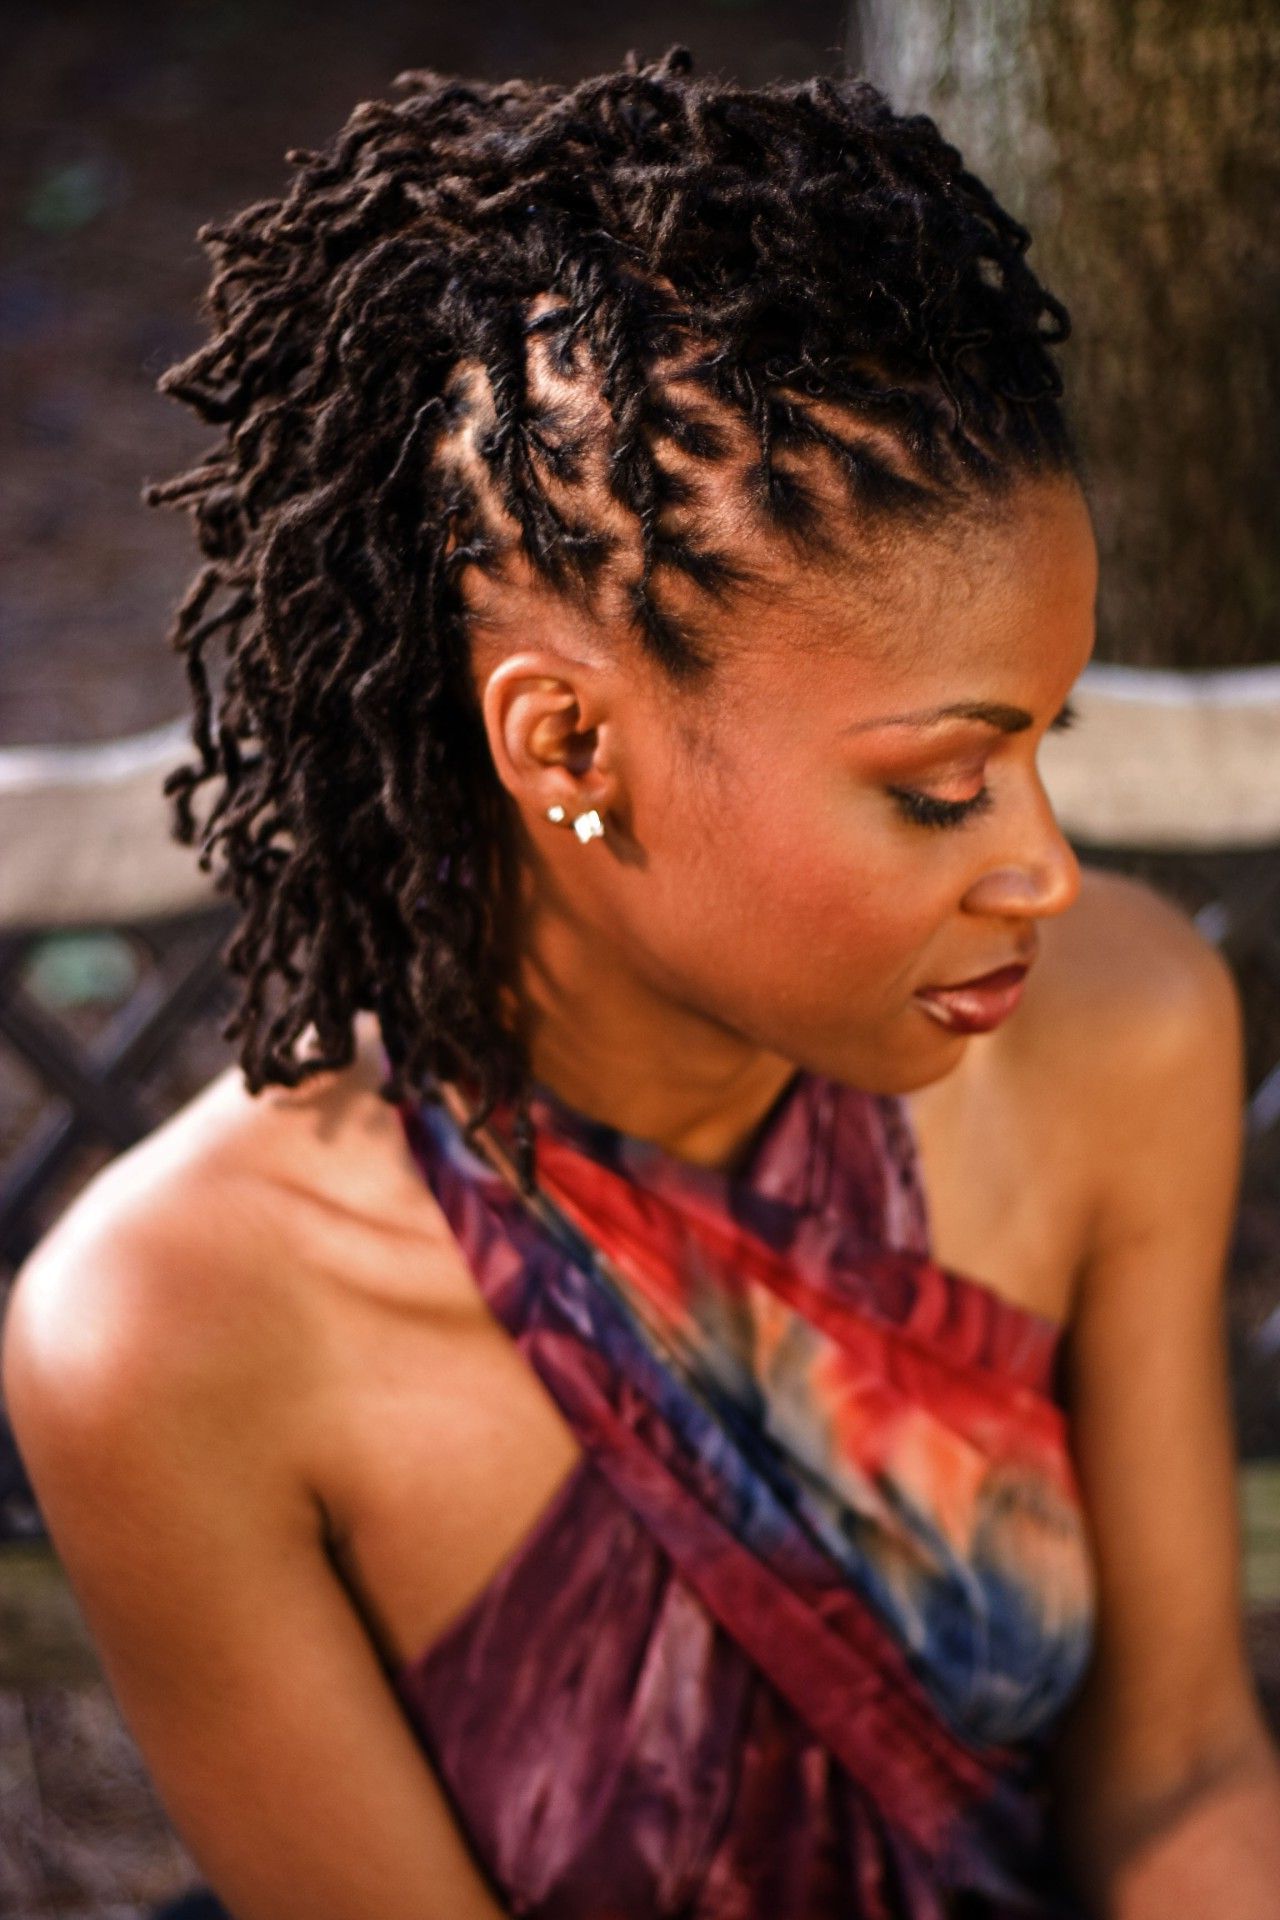 Hairstyles : Ladies Mohawk Updo Pretty Black Women Throughout Famous Dreadlocked Mohawk Hairstyles For Women (View 9 of 20)